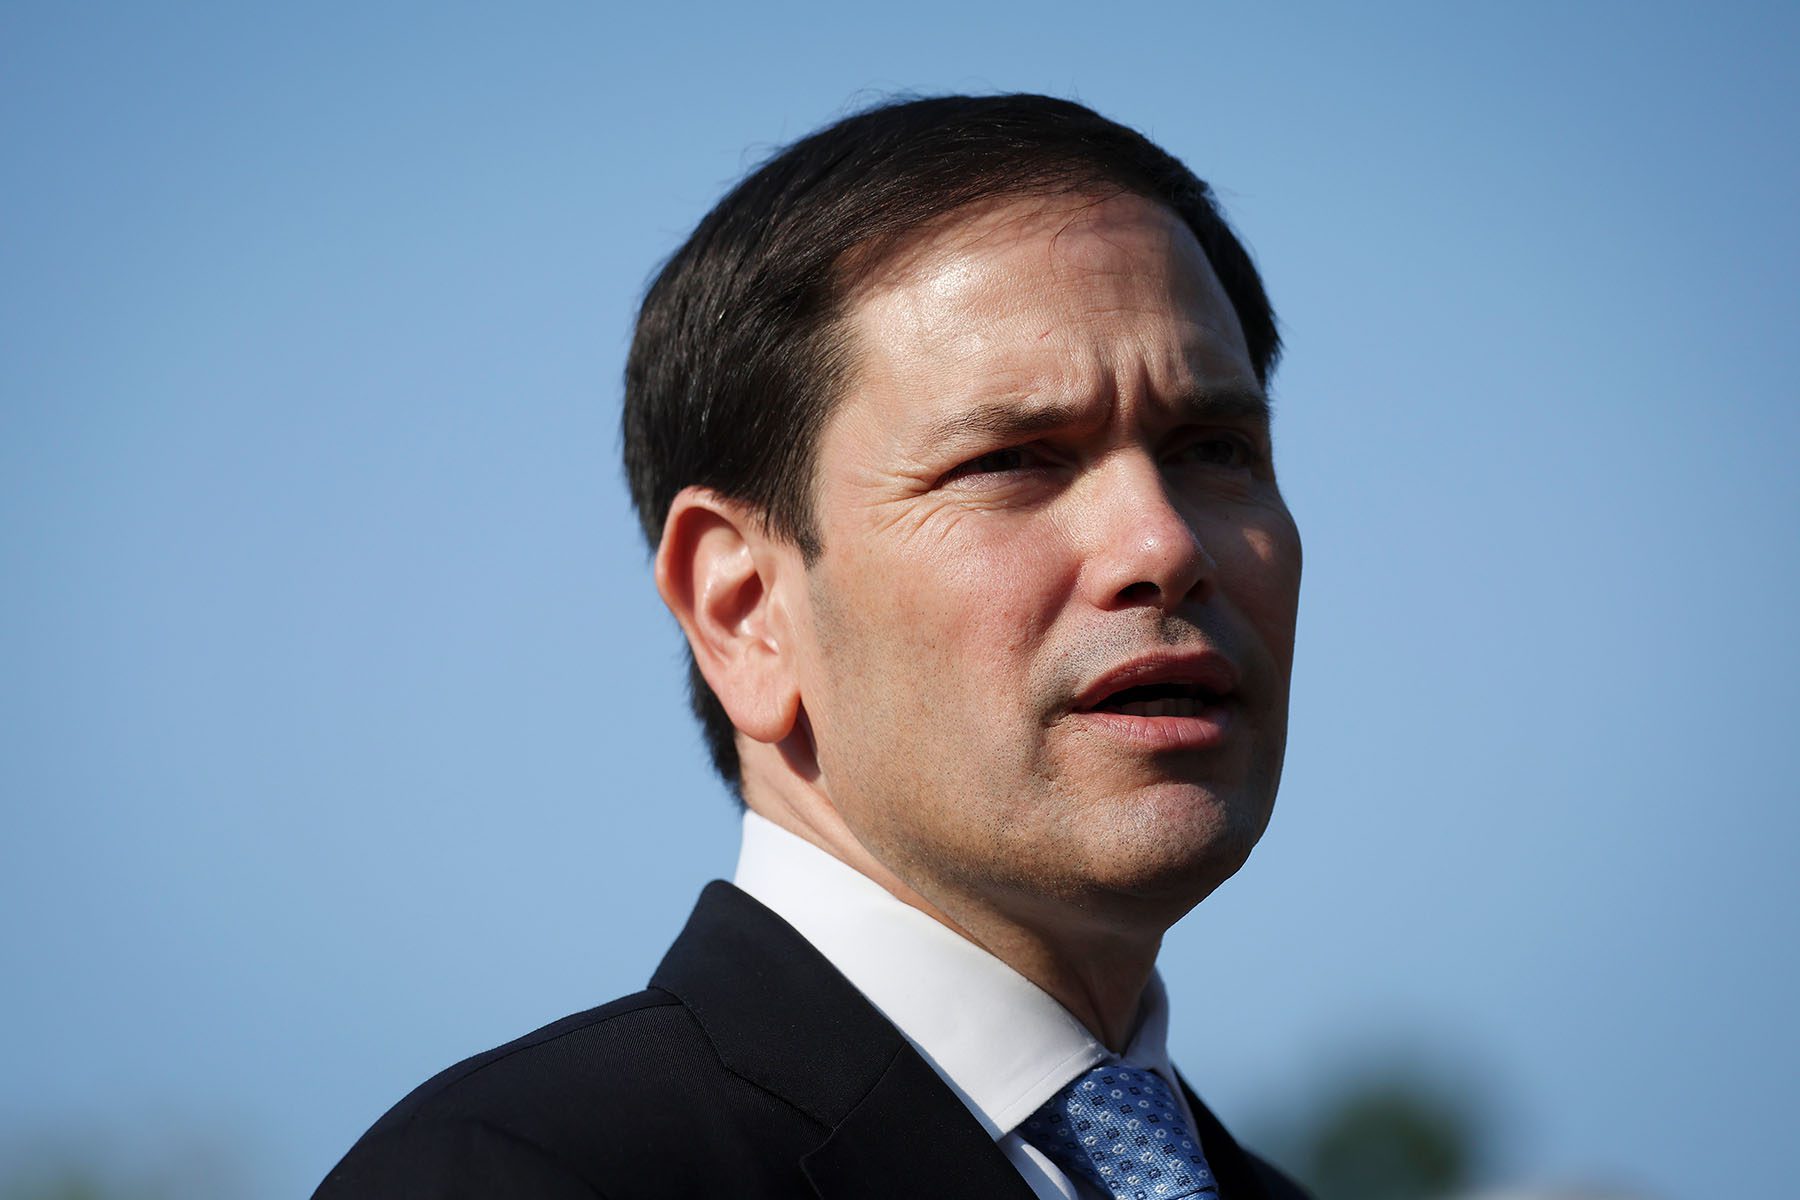 Sen. Marco Rubio speaks outside the White House during a news conference.